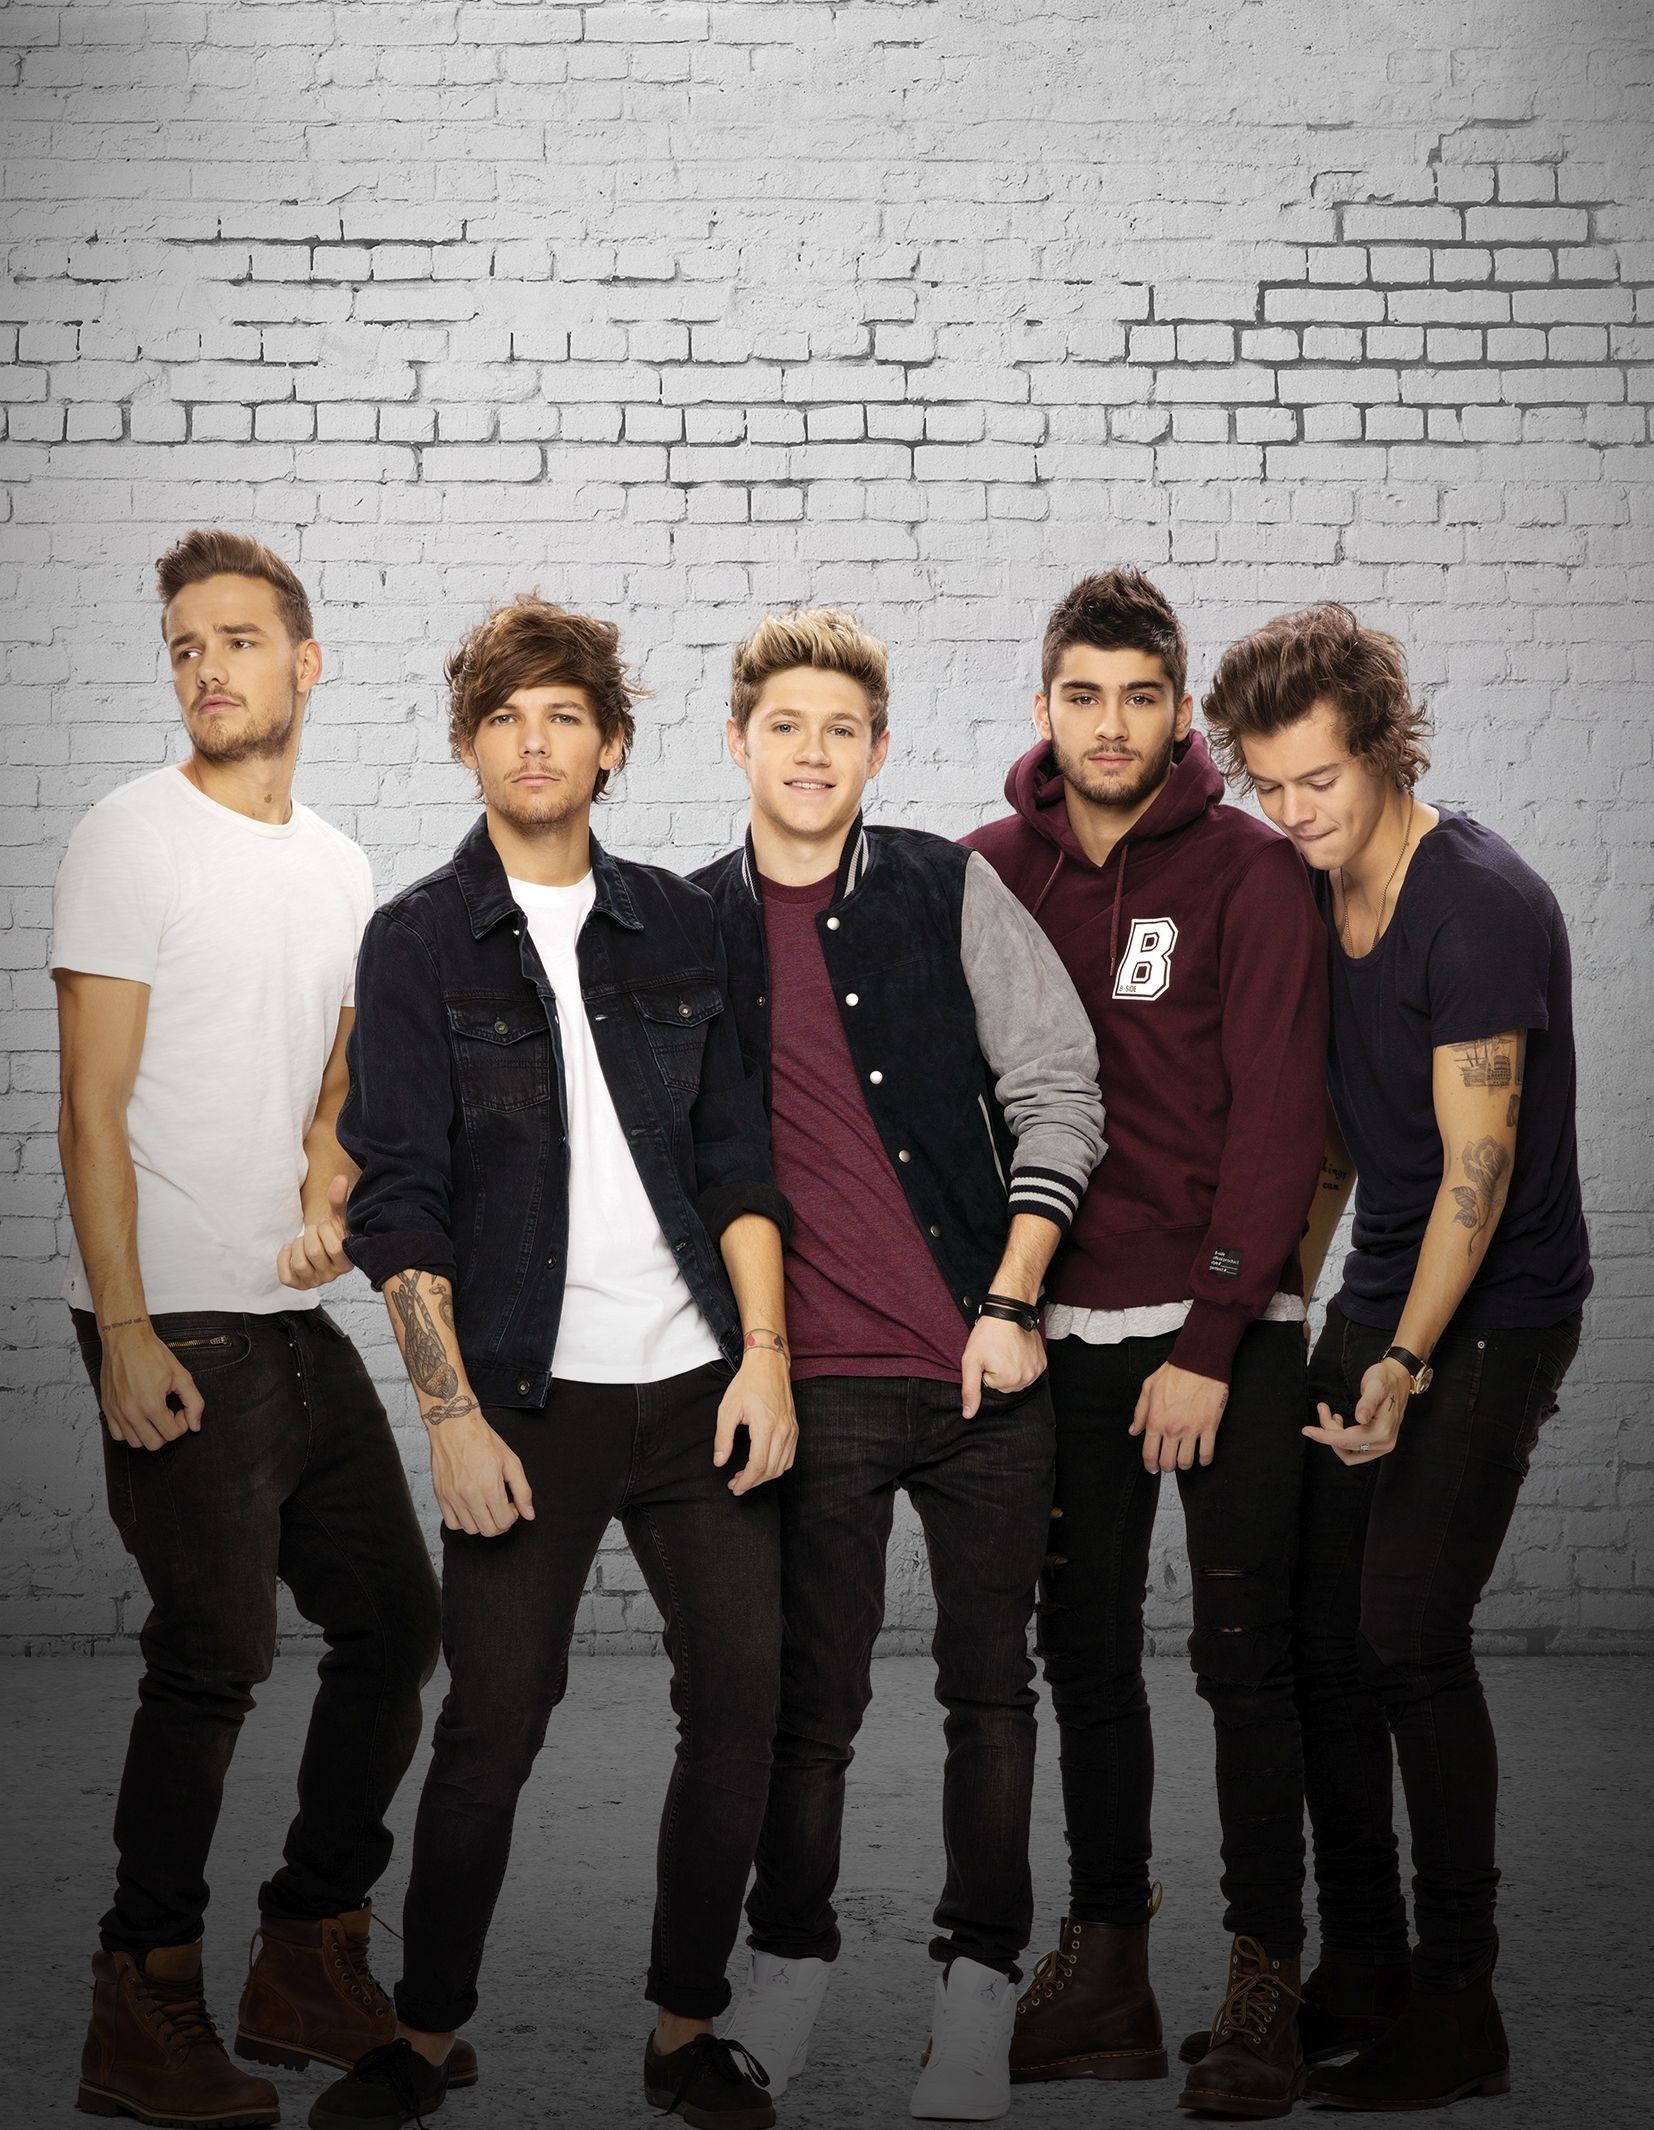 One Direction Iphone Wallpapers